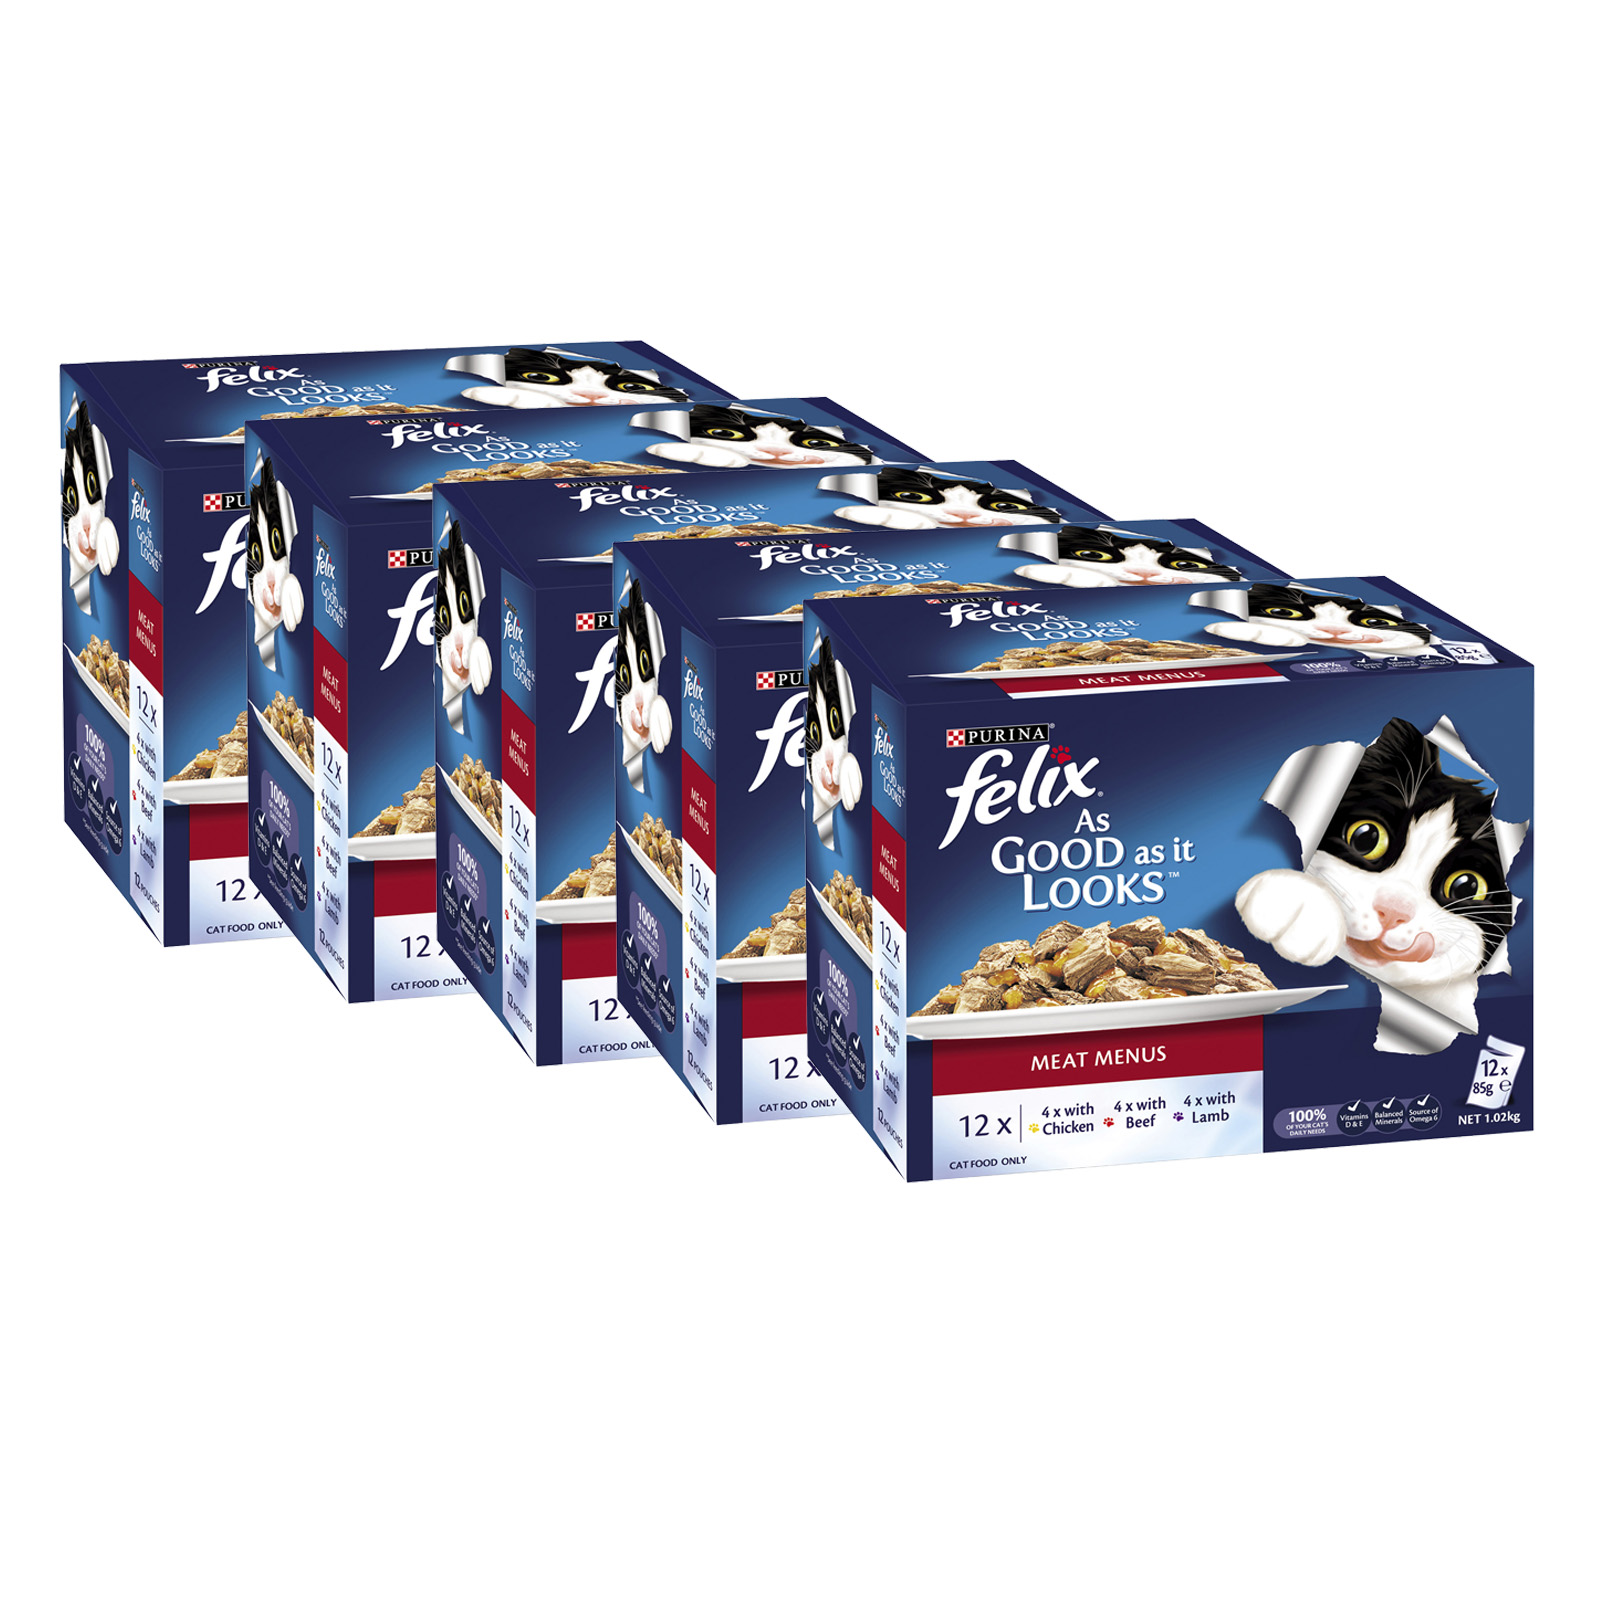 Felix Cat Pouches Chicken In Jelly 100g (20 Pouches) : : Pet  Supplies